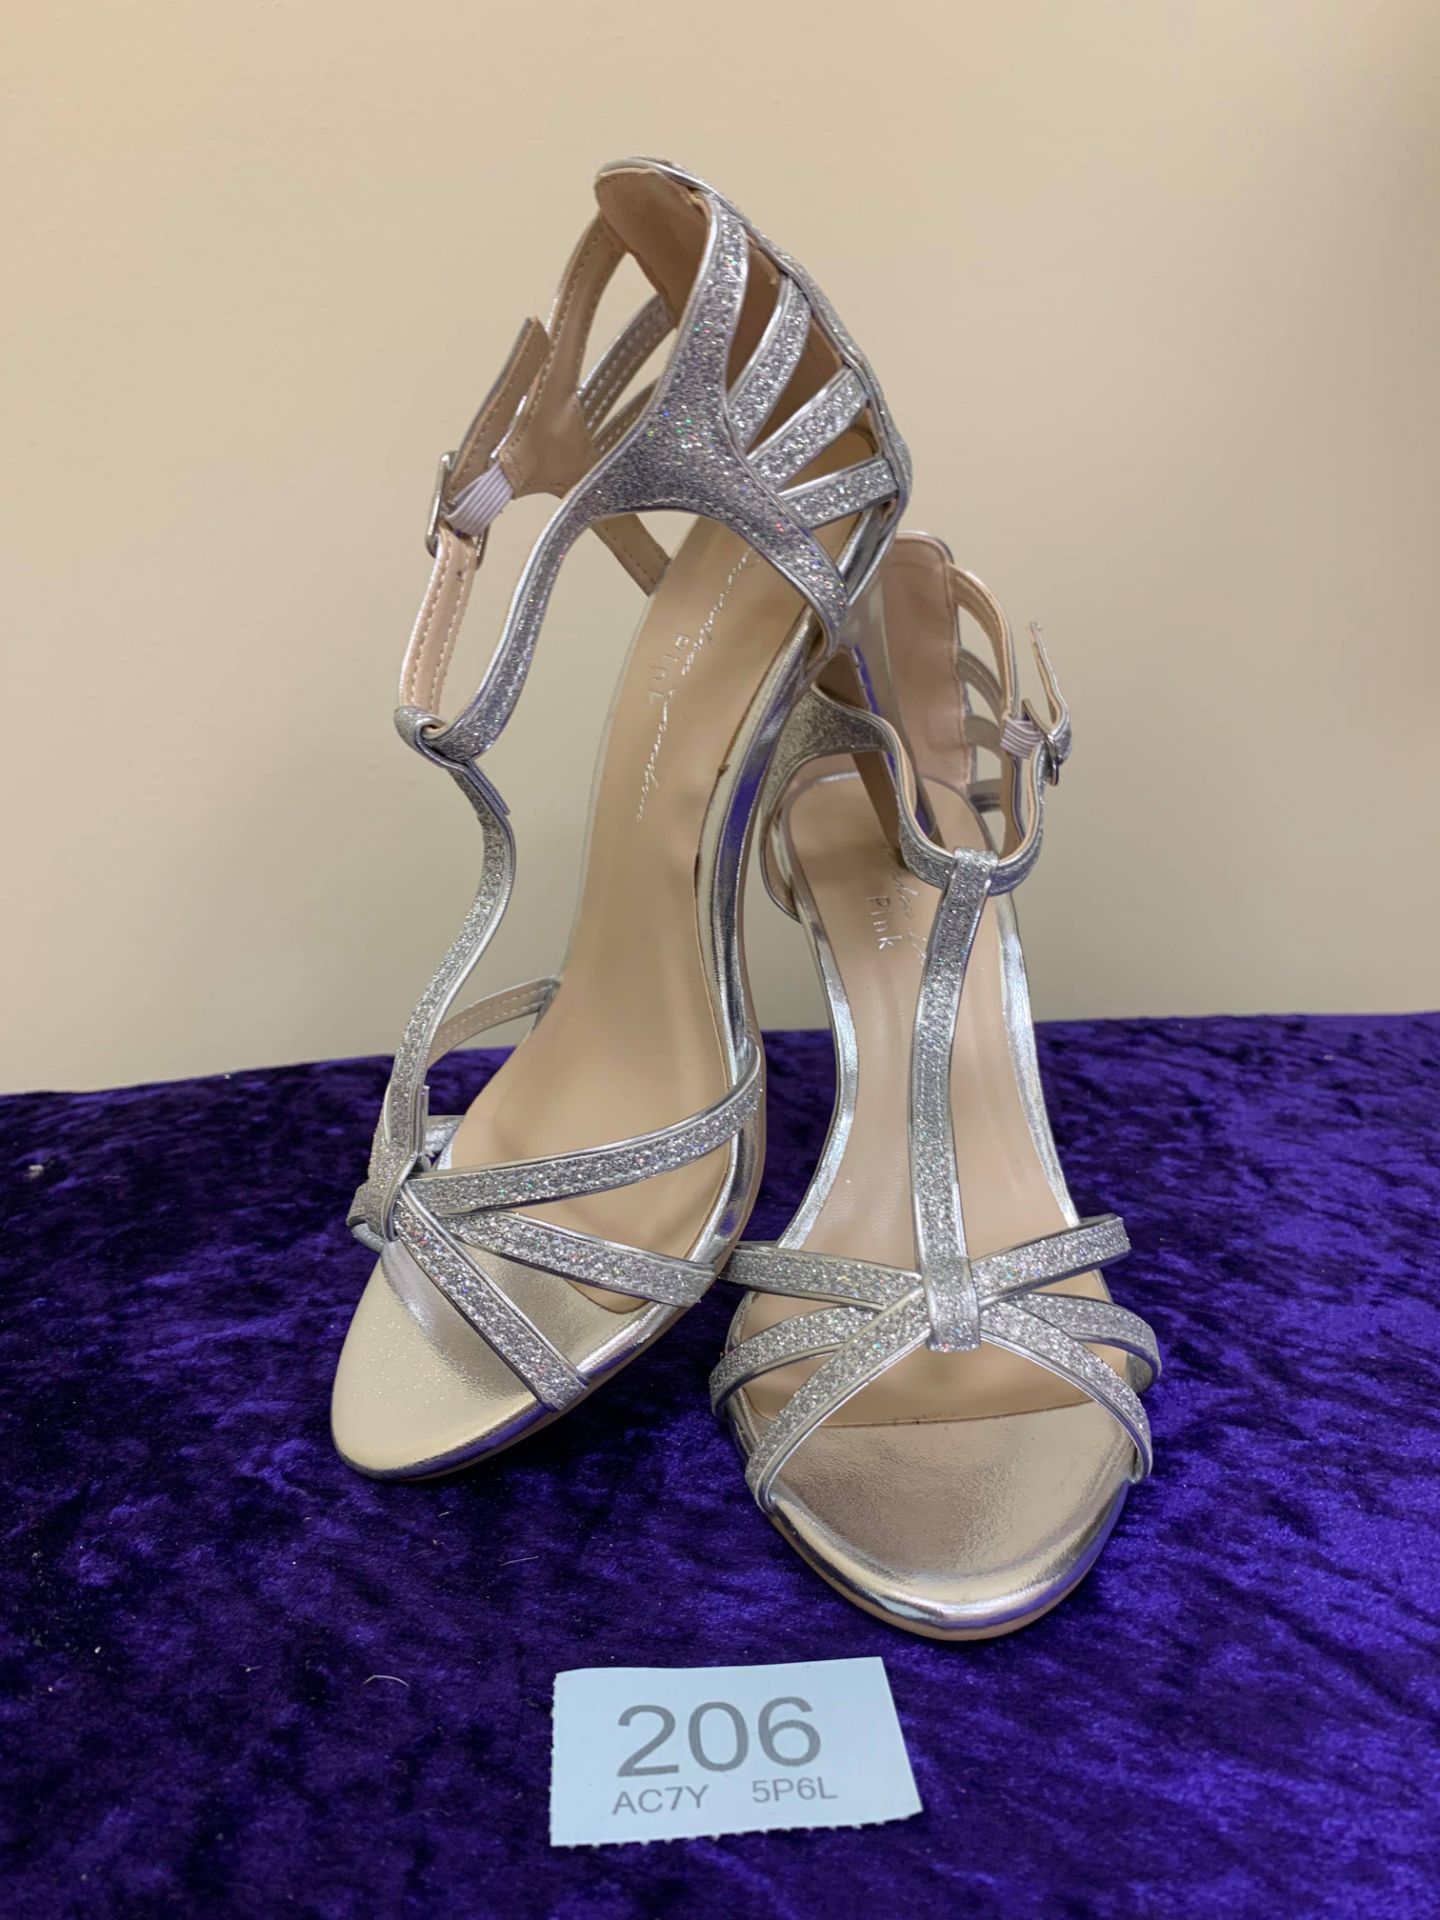 Designer Shoes Silver In Size 35. Code 206